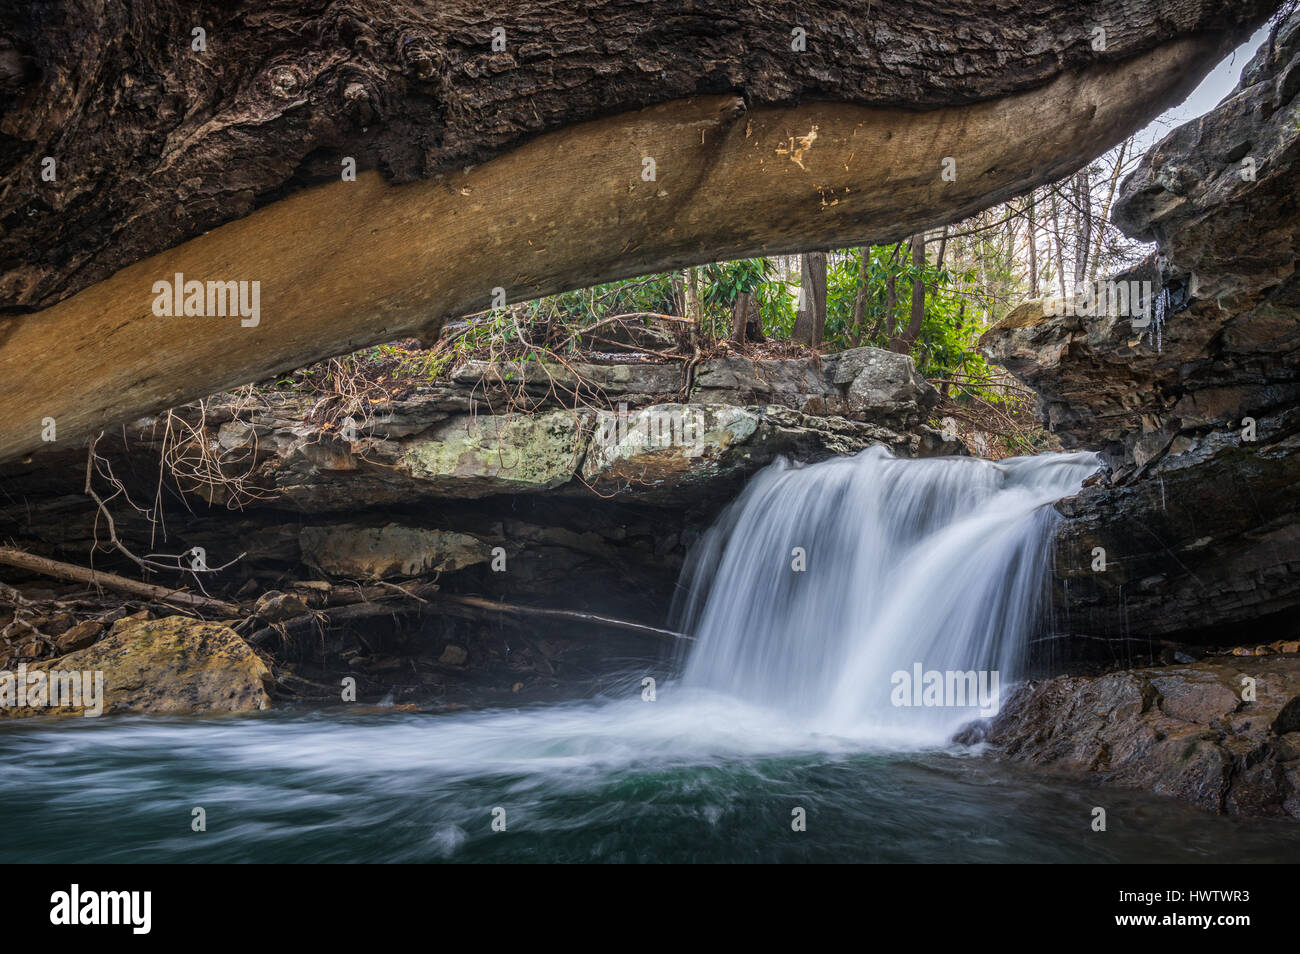 A downed tree provides the frame work for this window peering into this small waterfall on Keeney's Creek in the New River Gorge of West Virginia. Stock Photo